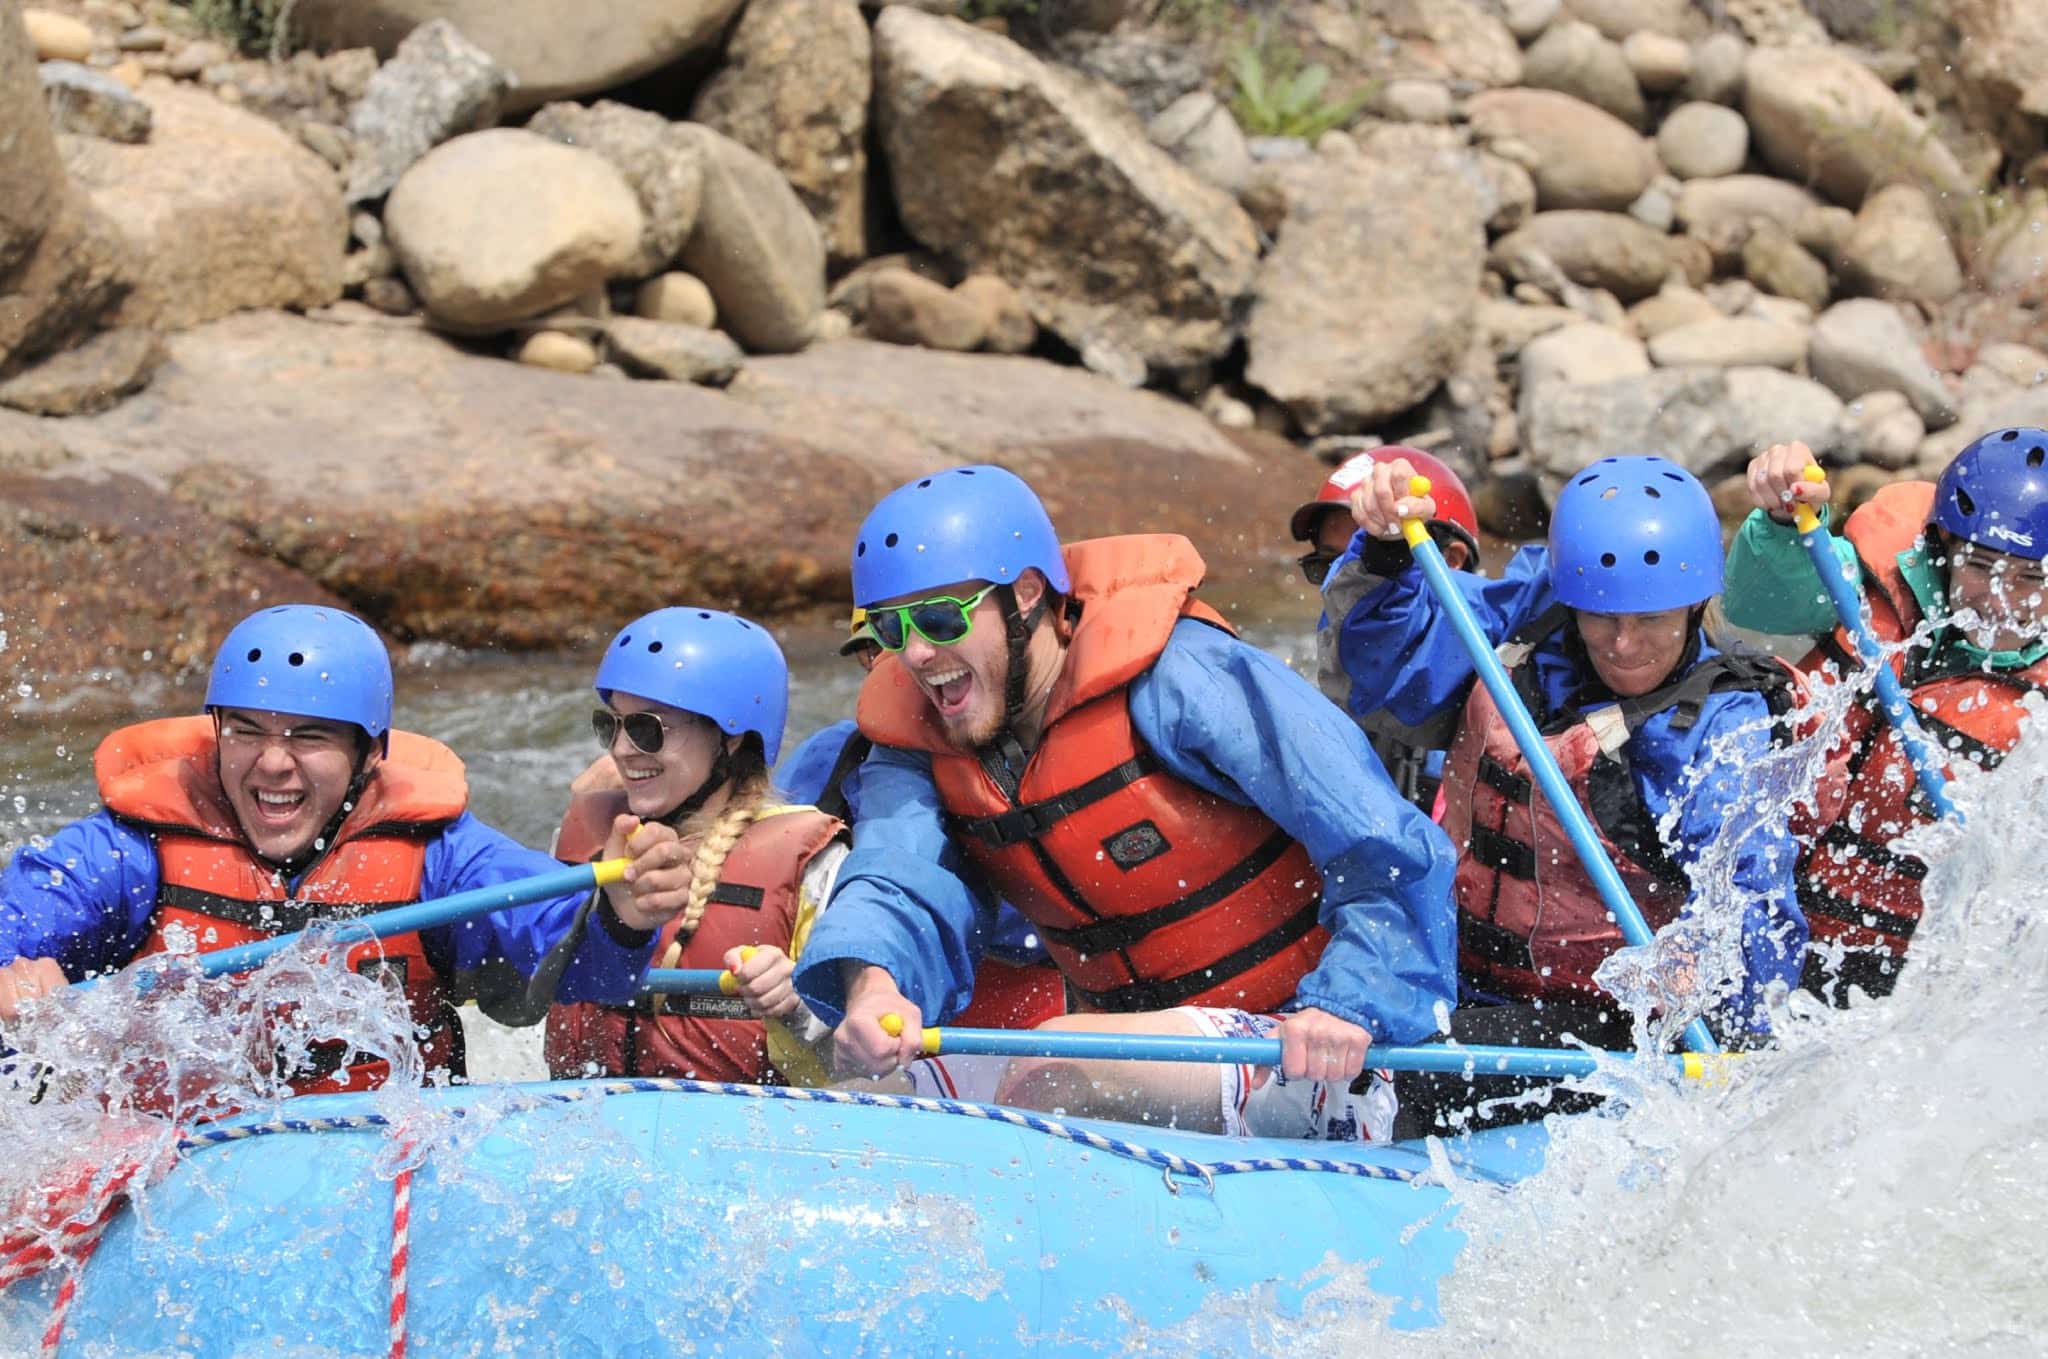 Exterior rafting photo with 7 rafters paddeling in the river.